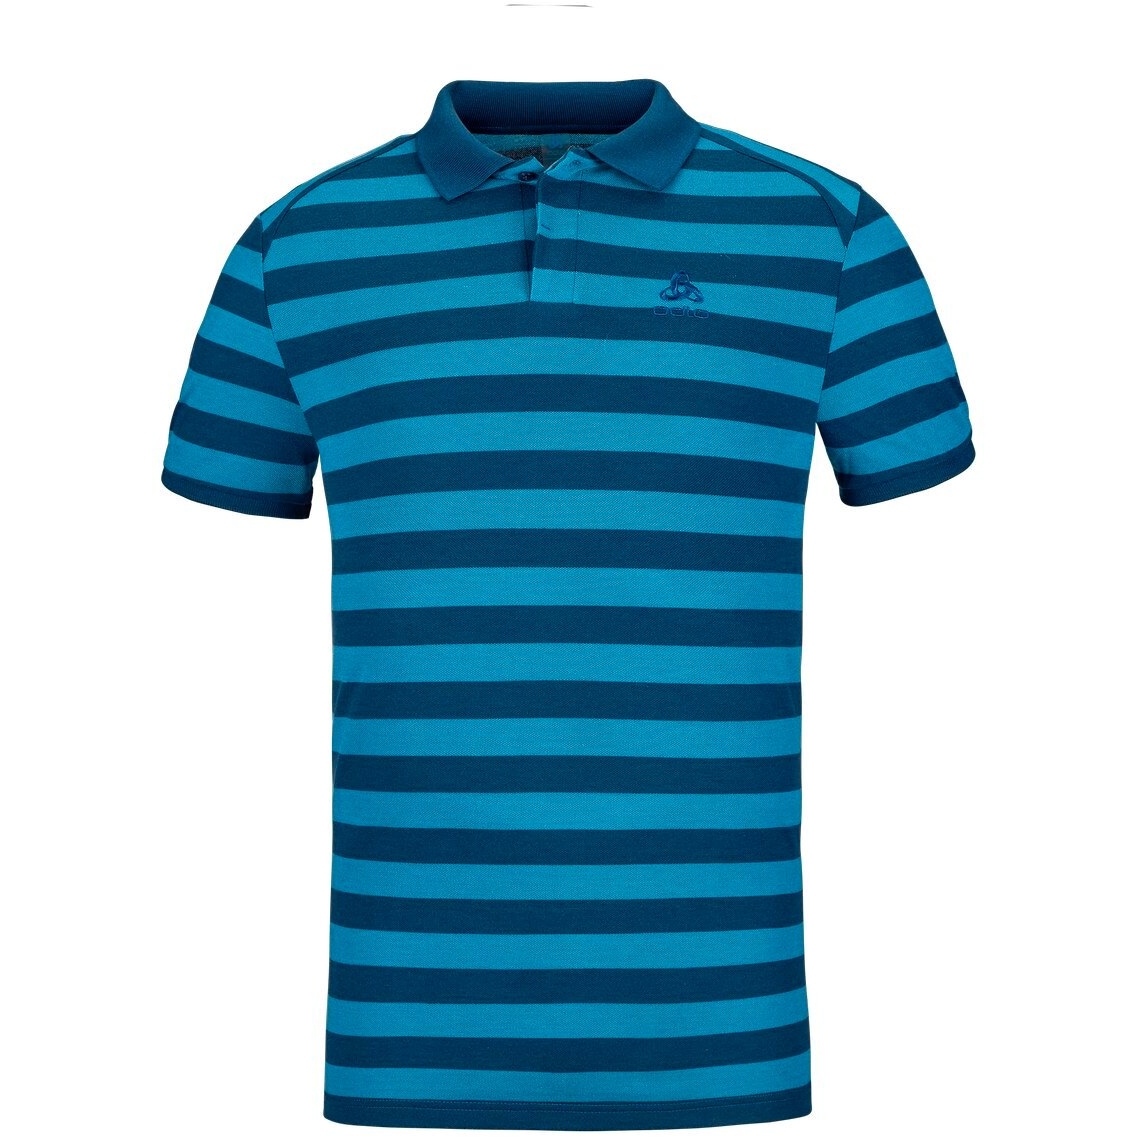 Picture of Odlo Concord Polo T-Shirt Men - saxony blue - blue wing teal